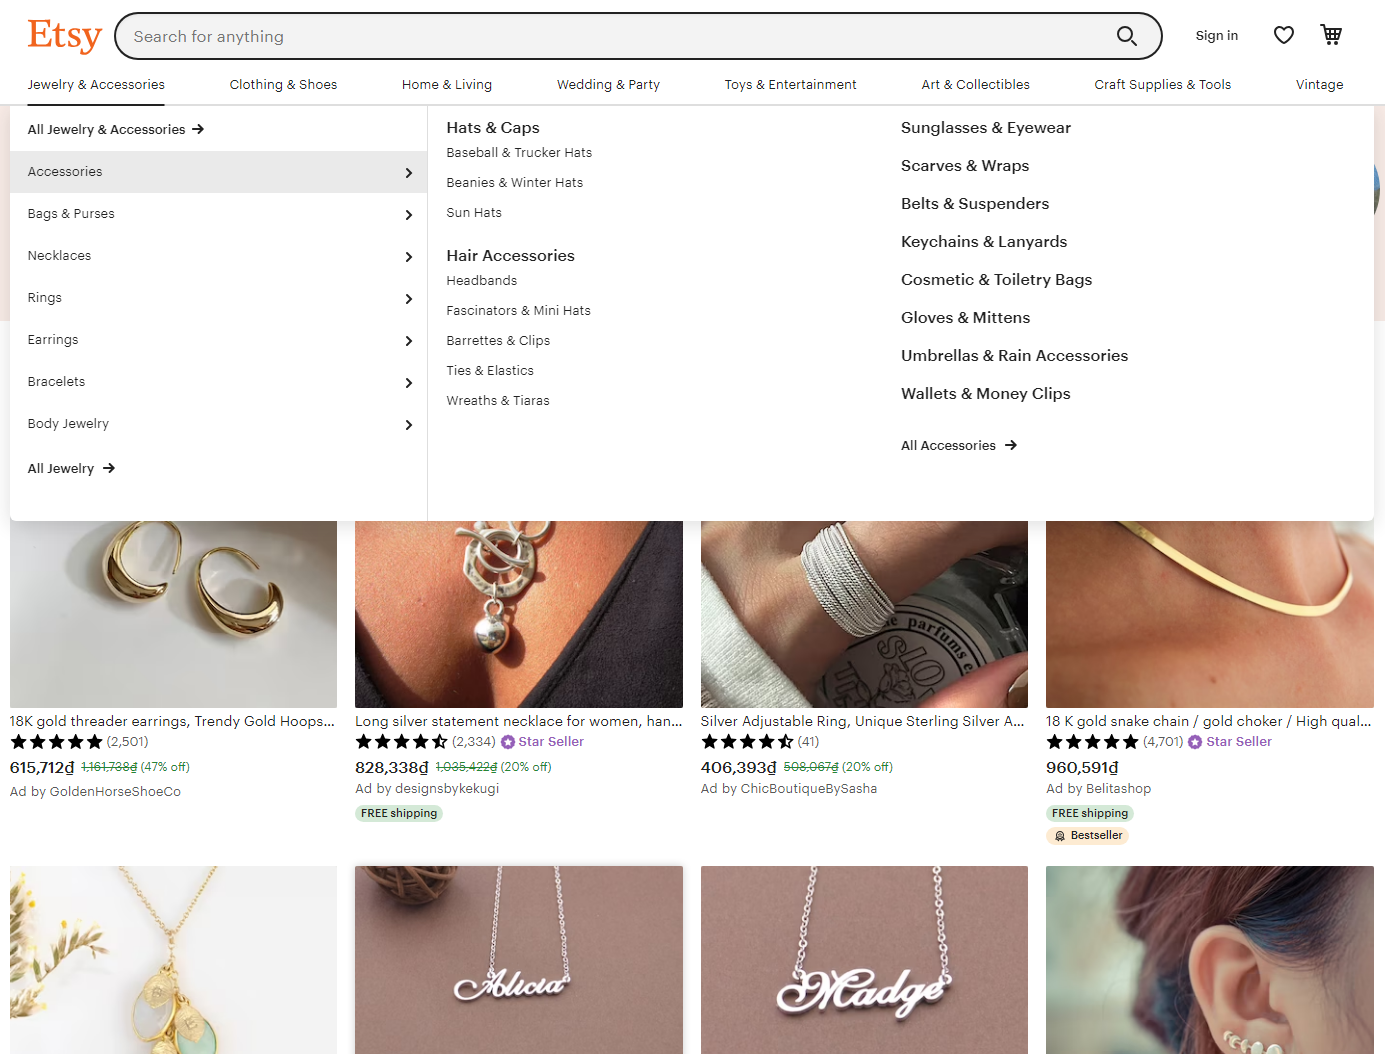 Product Categories and Navigation